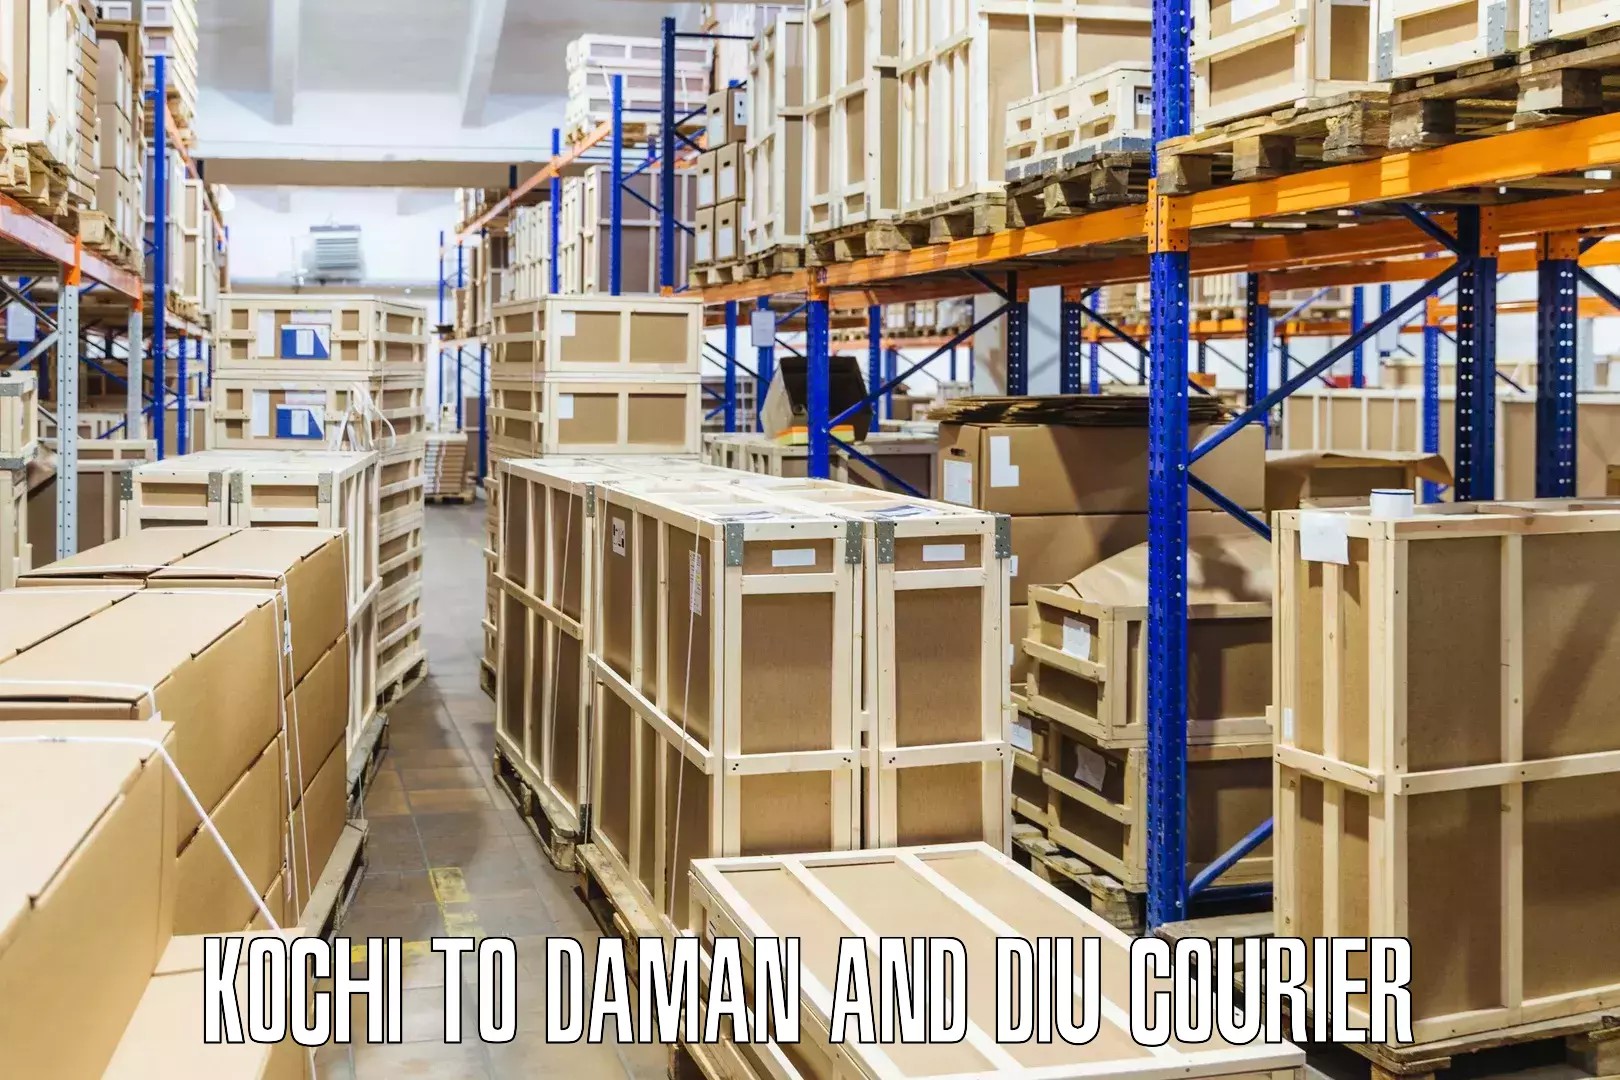 Nationwide parcel services Kochi to Daman